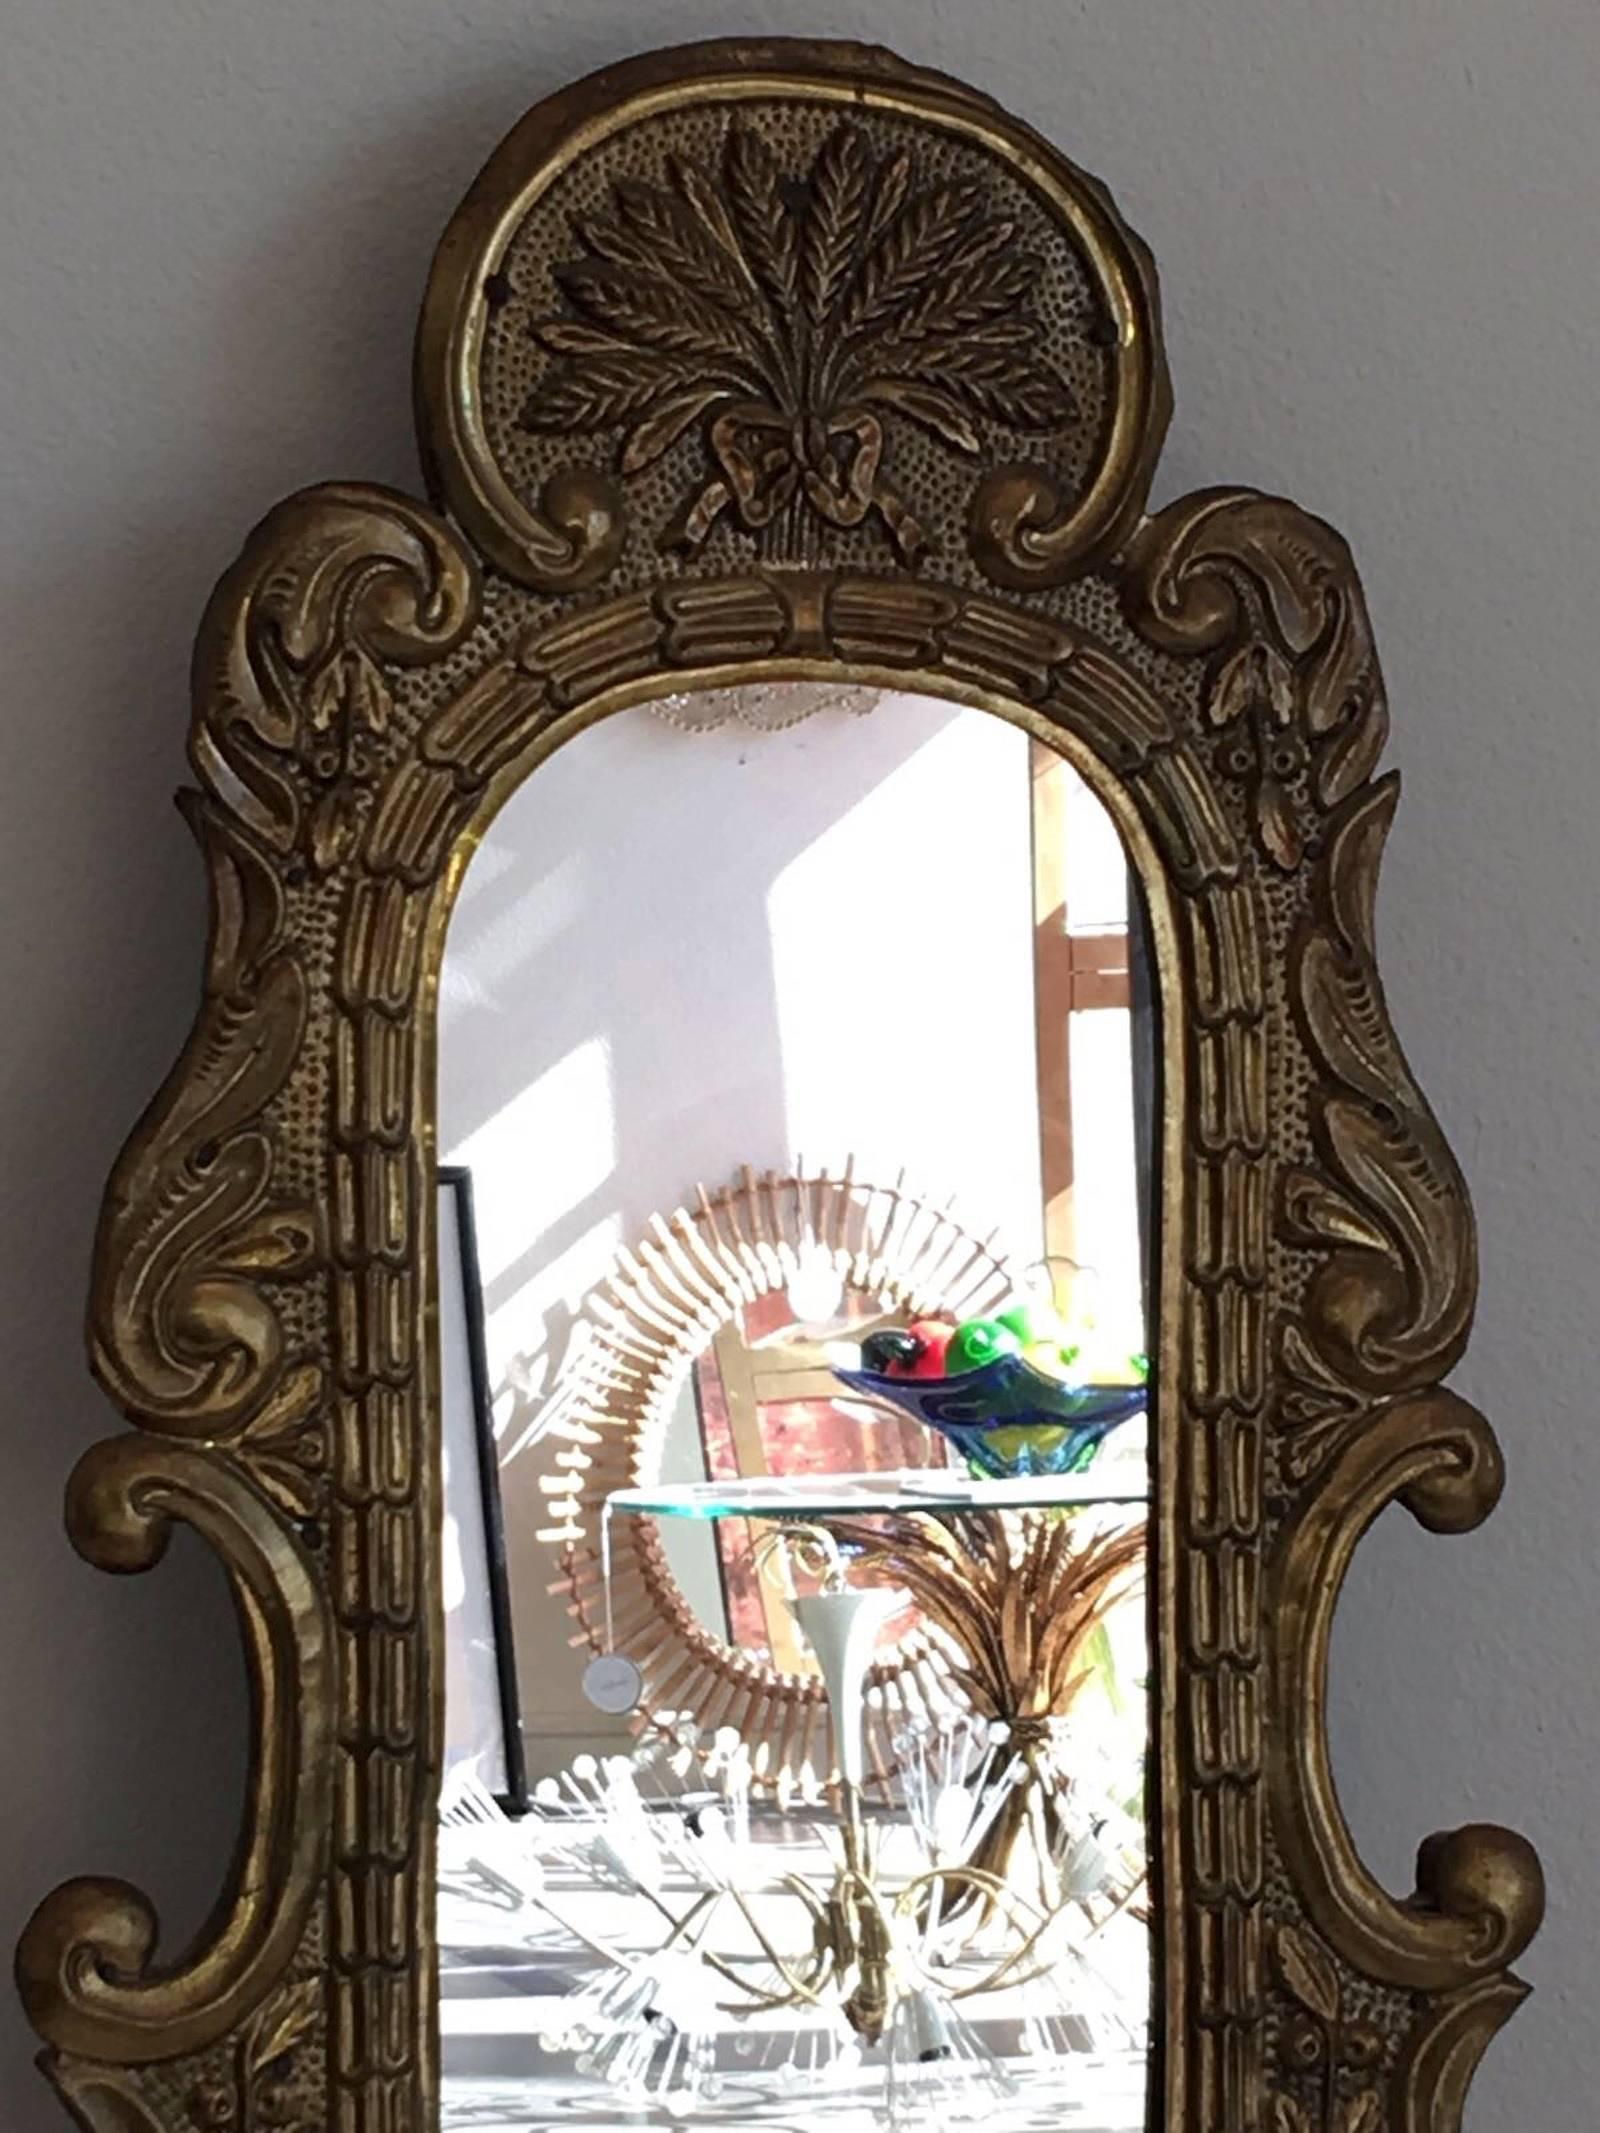 This mirror was designed and constructed during Germany's Baroque era, 18th century. It was originally build to be a standing mirror. Sometime during the 19th century it was converted into a hanging wall mirror. The back foot was removed and a new